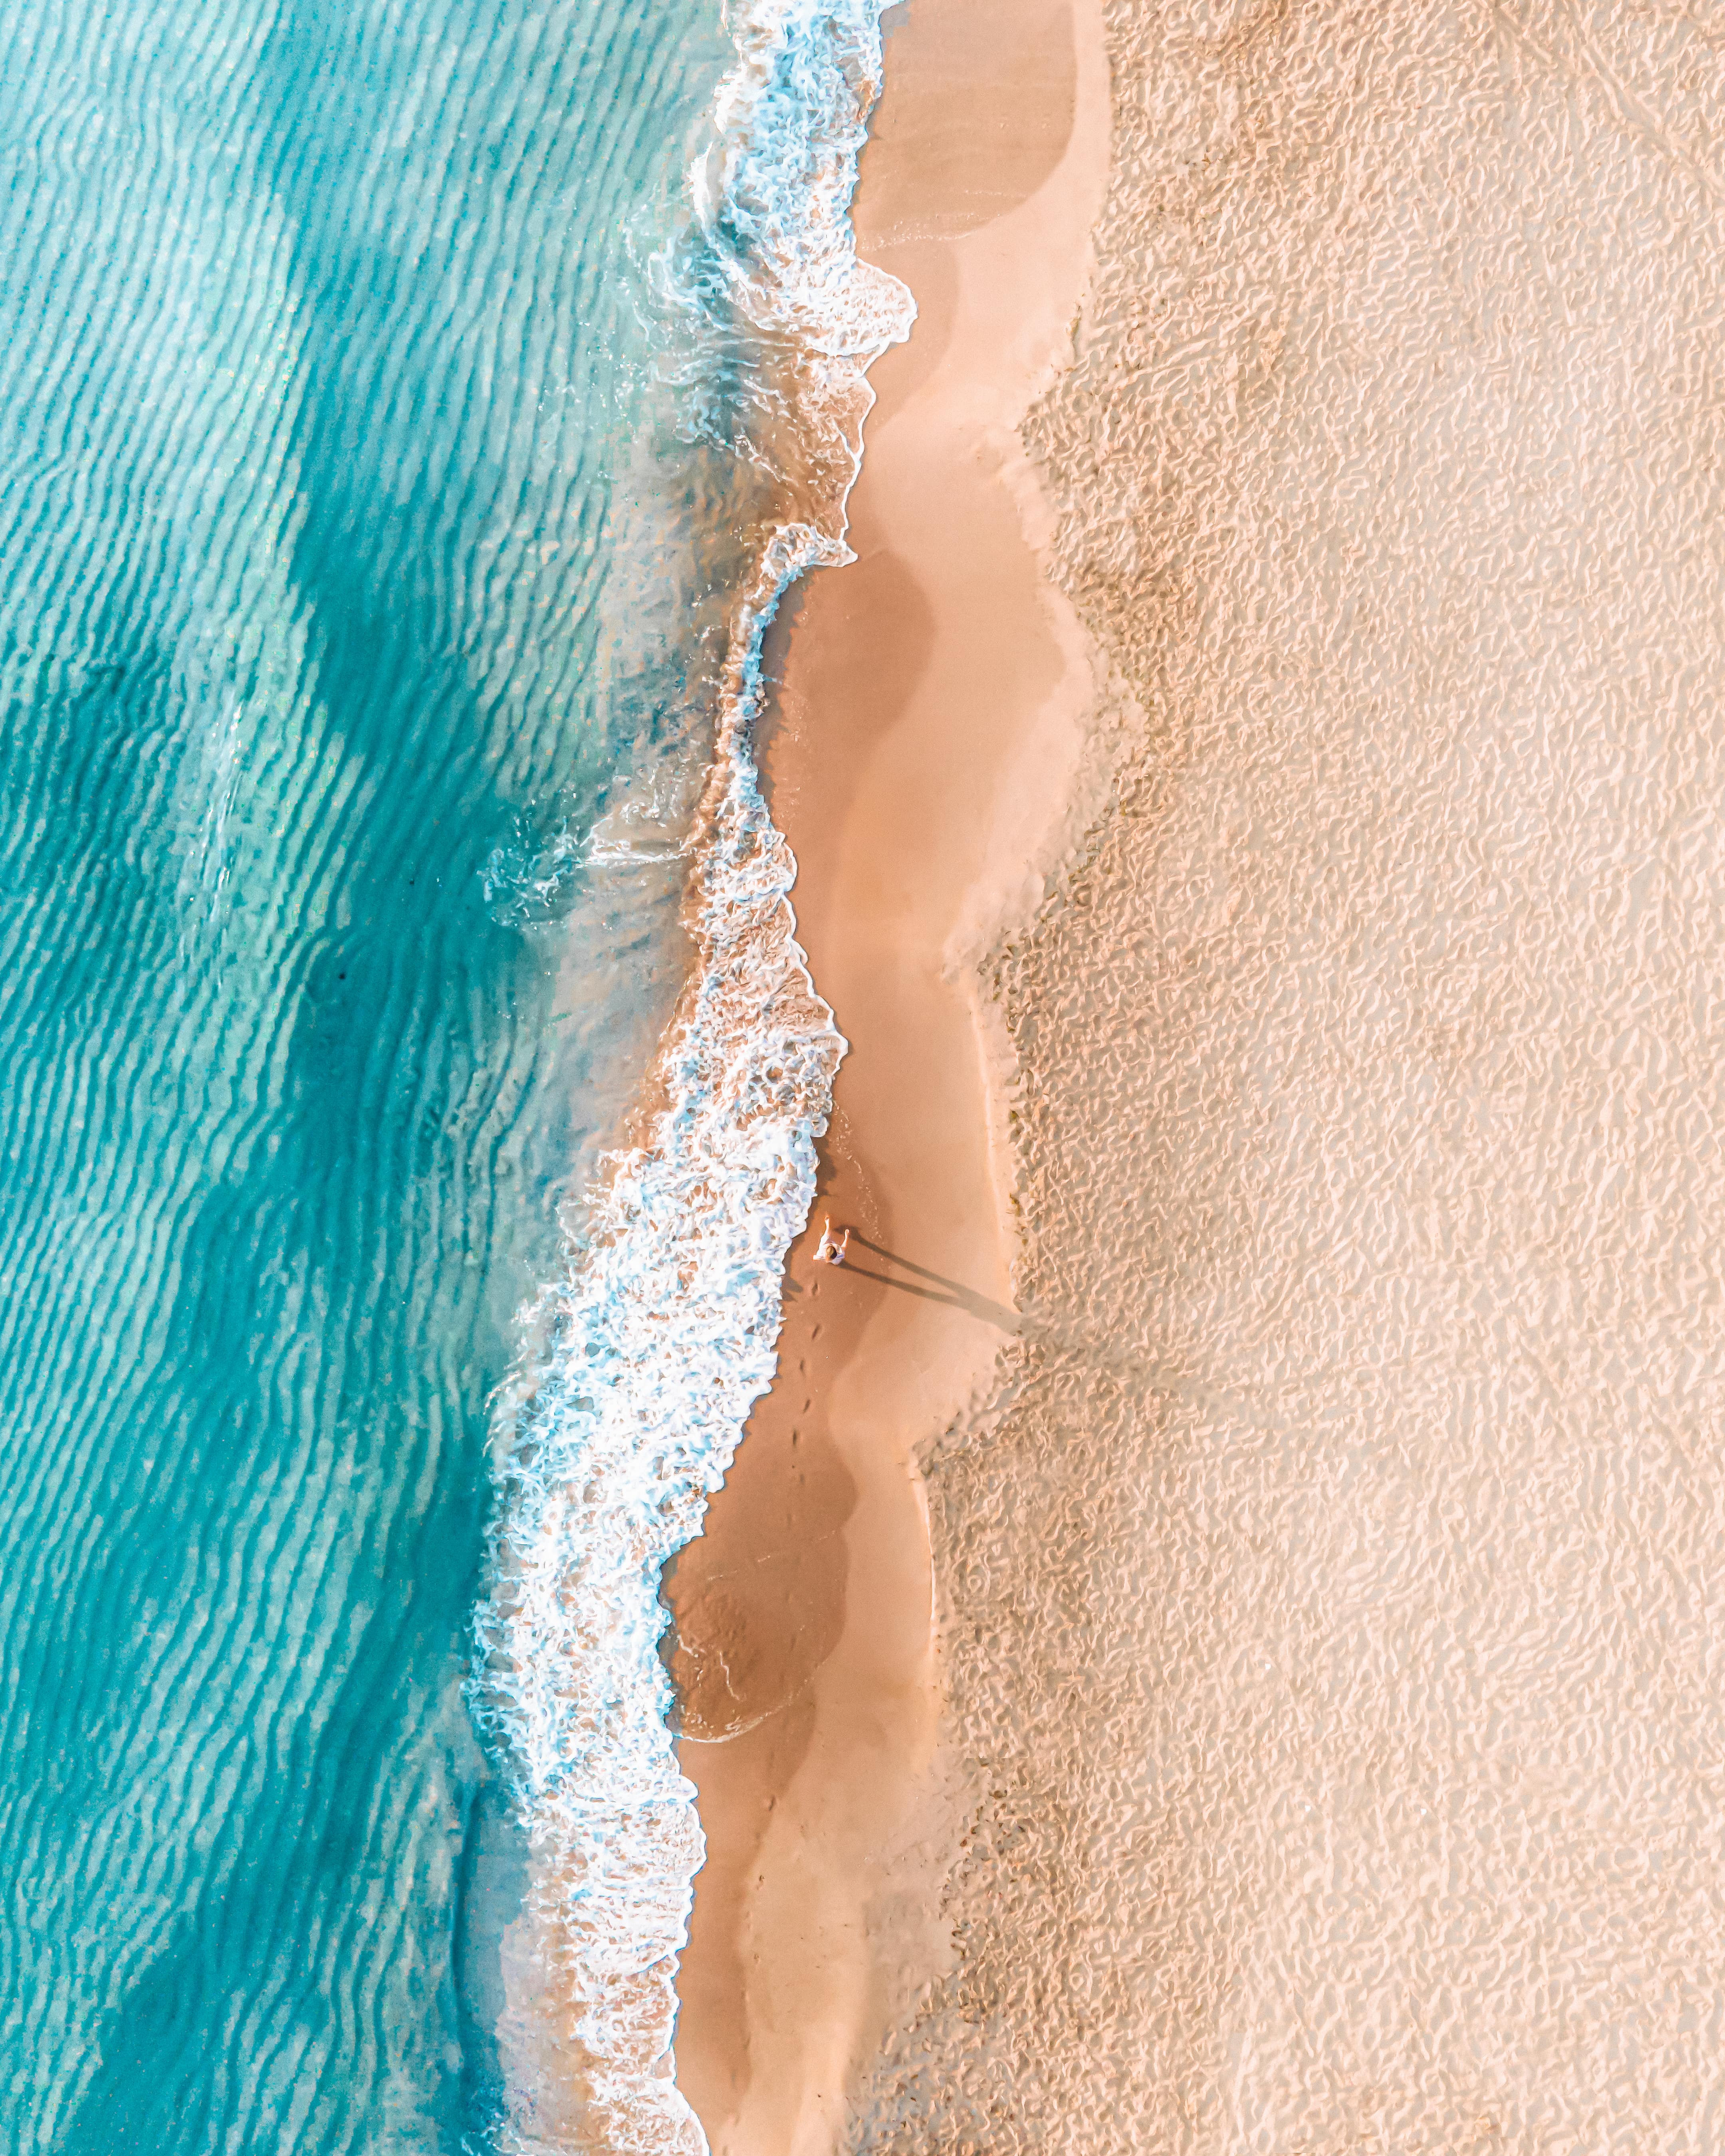 bright top down image of sand, waves and the ocean